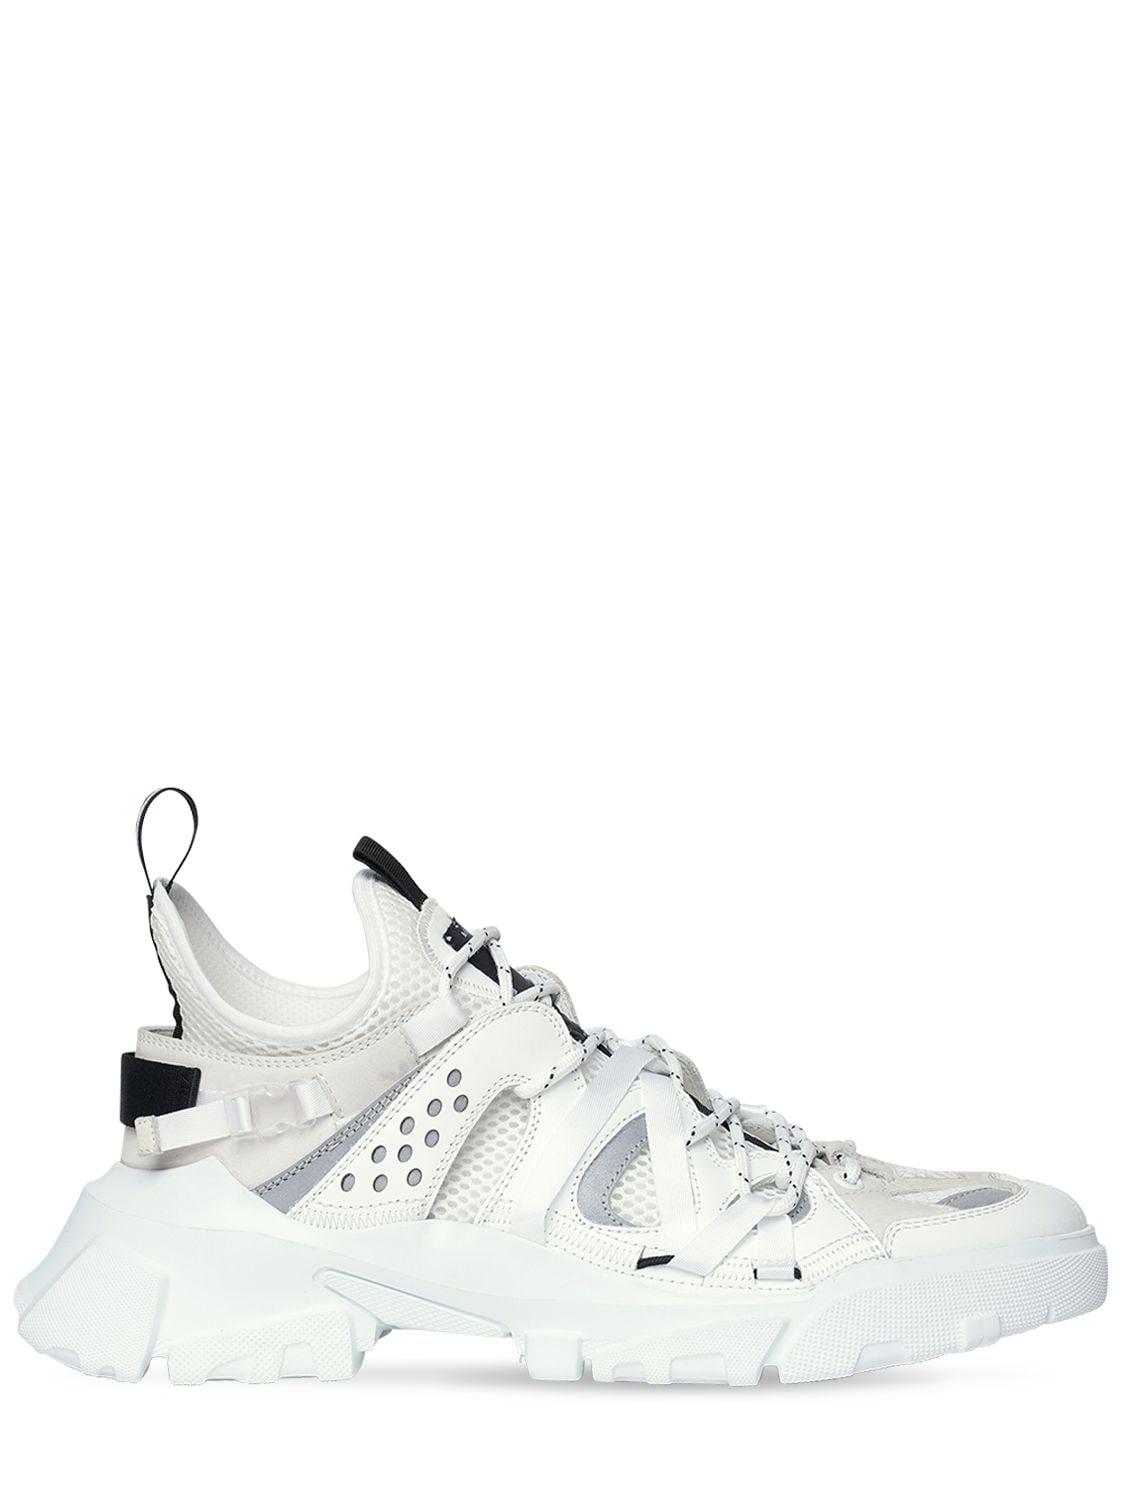 McQ Descender Leather & Fabric Sneakers in White - Lyst